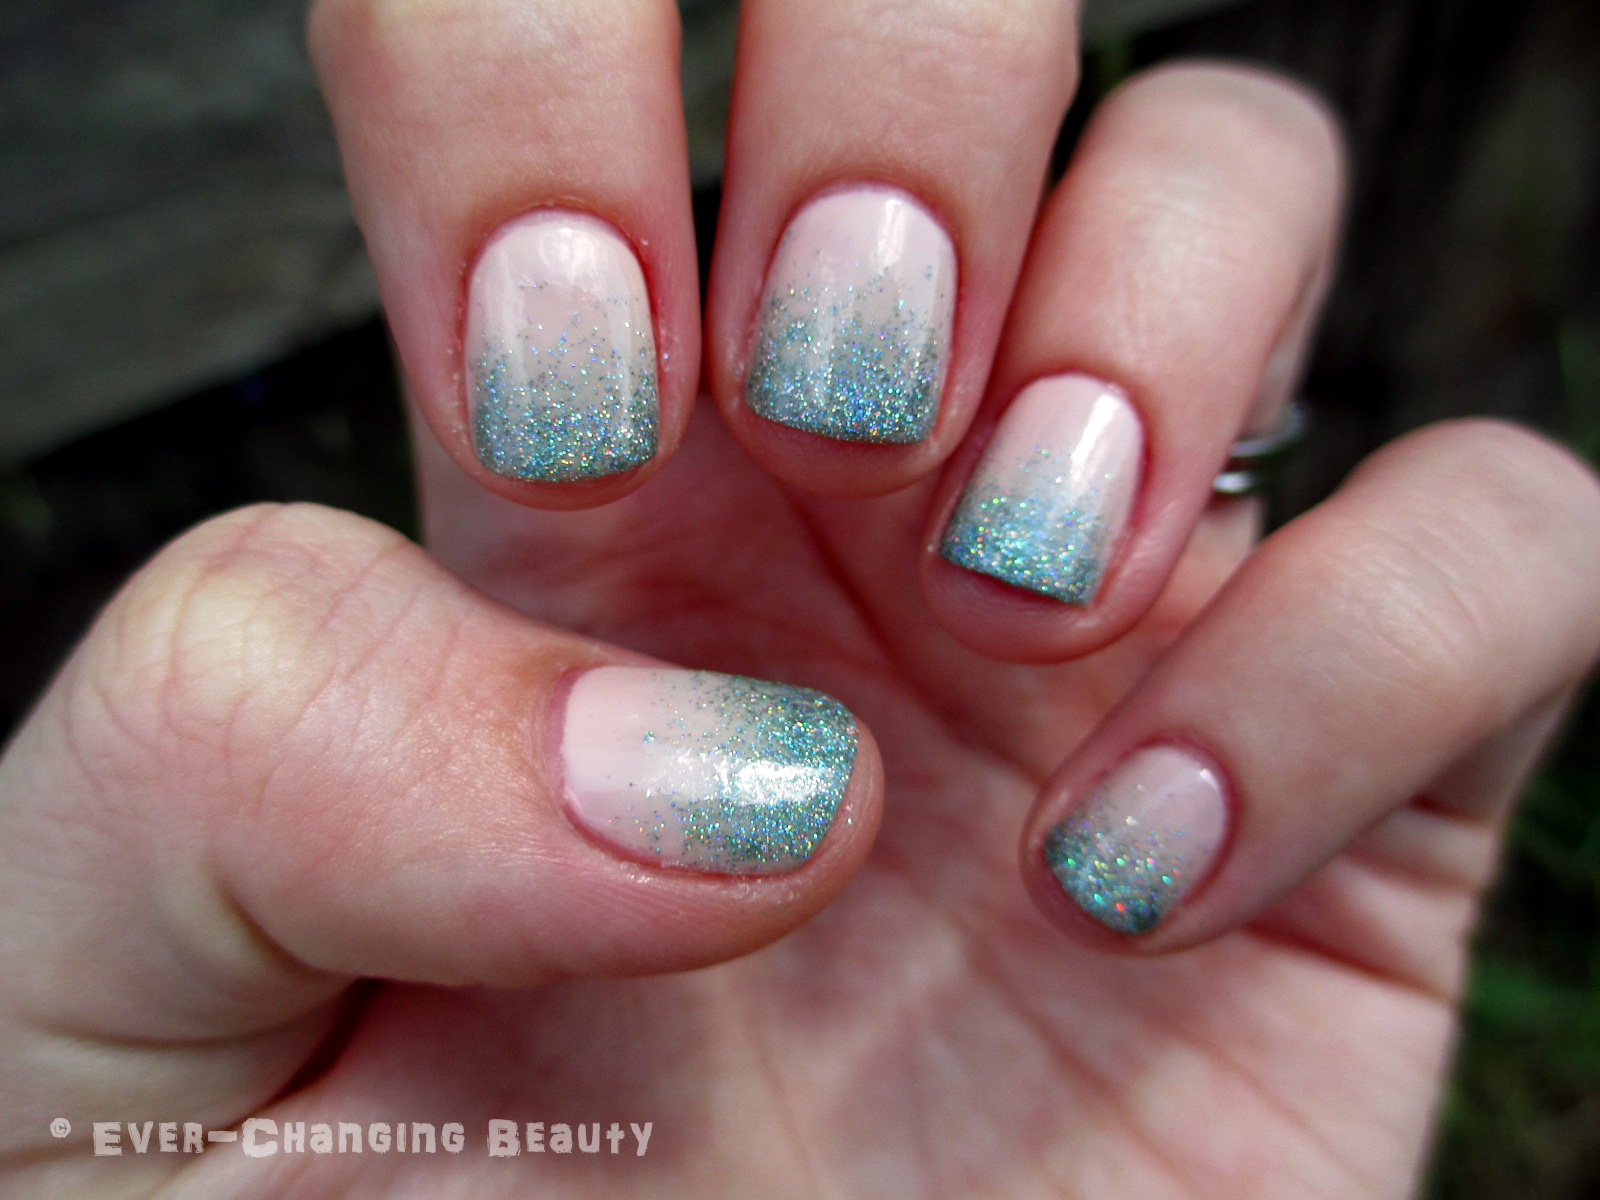 Ever-Changing Beauty.: A First for Me - Glitter Gradients.